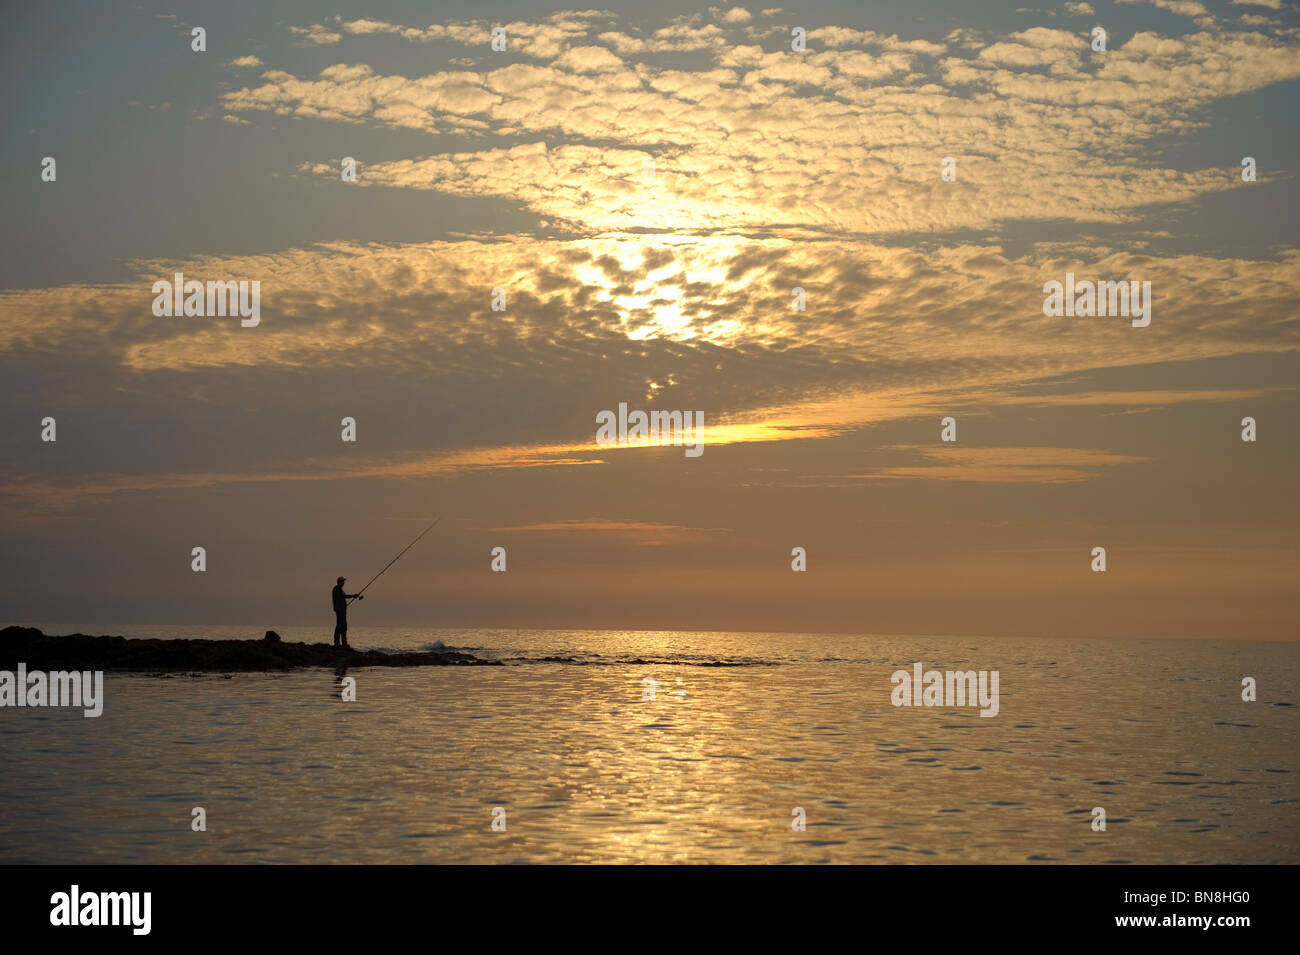 Silhouette of a man fishing in the sea at sunset, Aberystwyth Cardigan Bay west wales uk Stock Photo